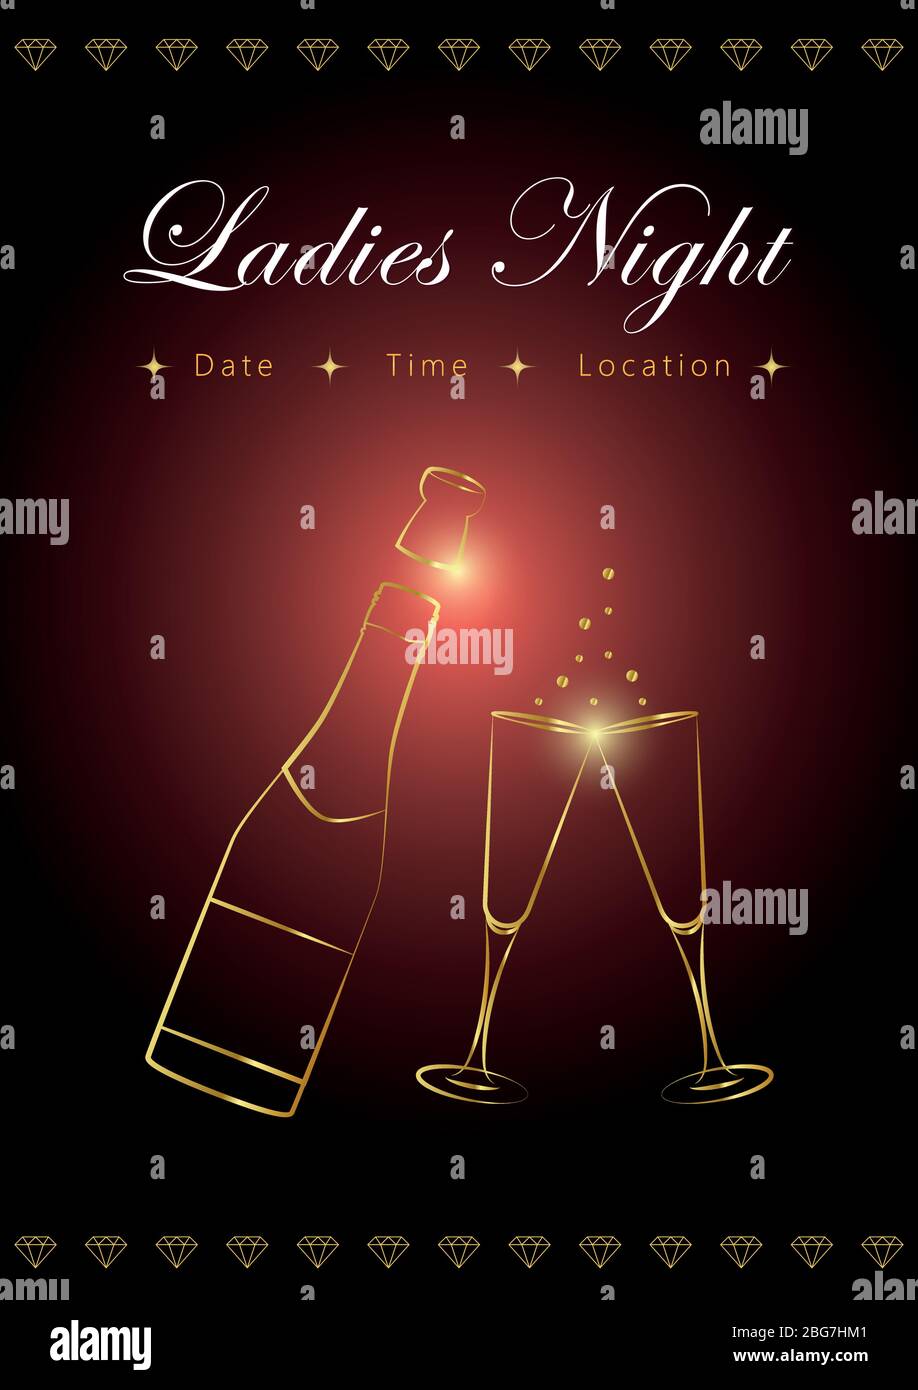 bottle and glasses of champagne vector ladies night poster vector illustration EPS10 Stock Vector